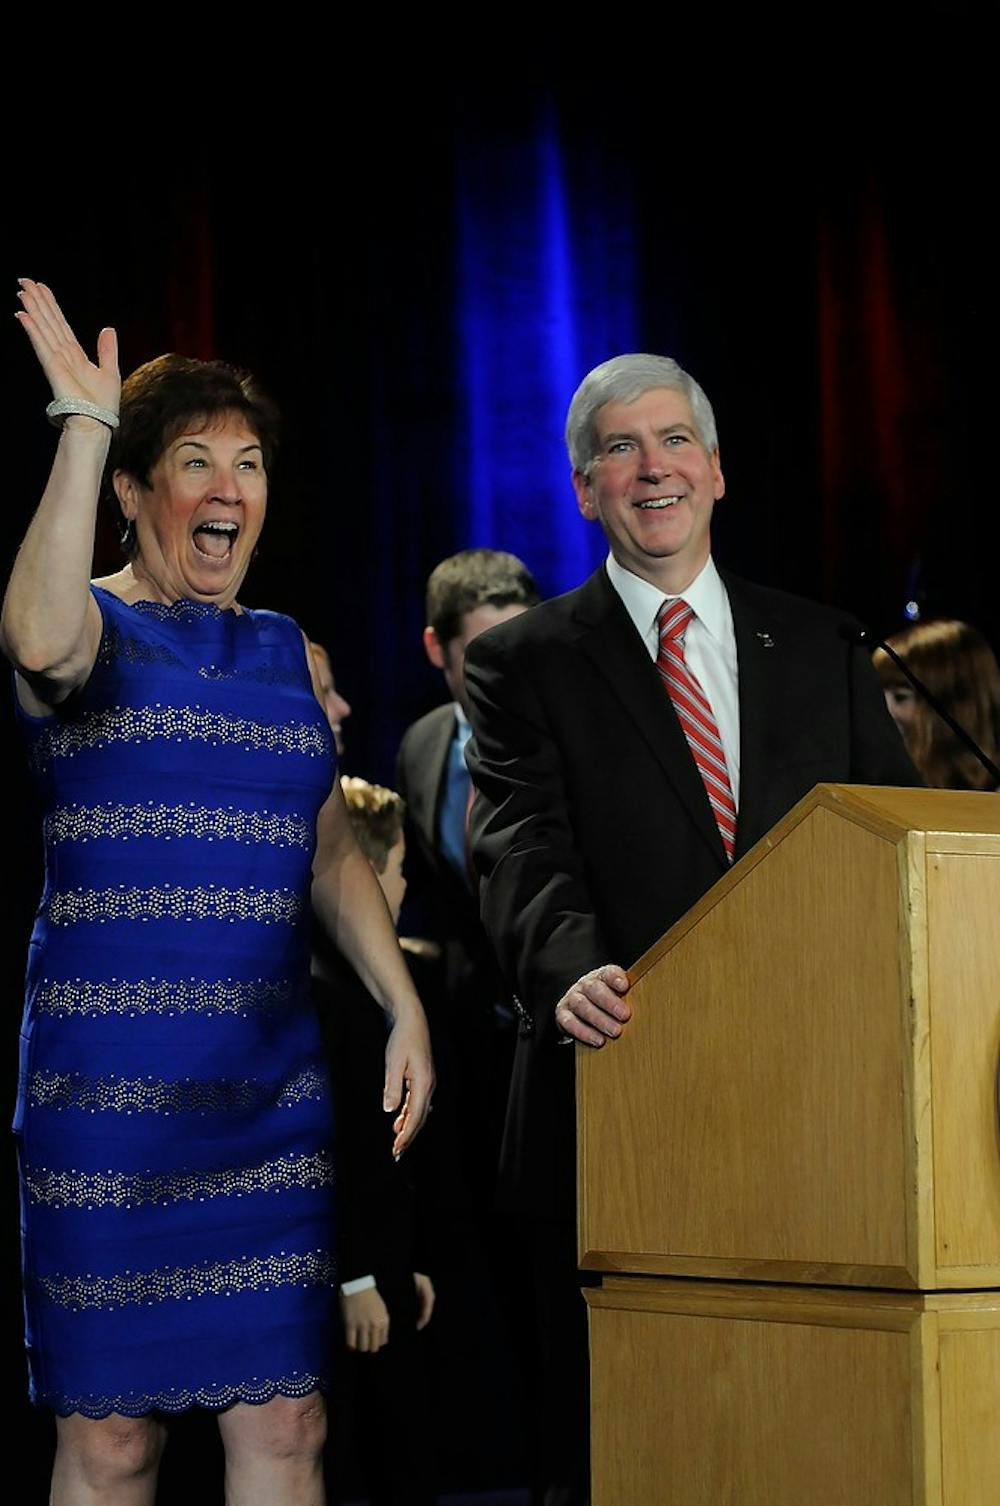 <p>Governor Rick Snyder and wife Sue Snyder celebrate the election win Nov. 4, 2014, at the Detroit Marriott at the Renaissance Center in Detroit, Mich. Jessalyn Tamez/The State News</p>